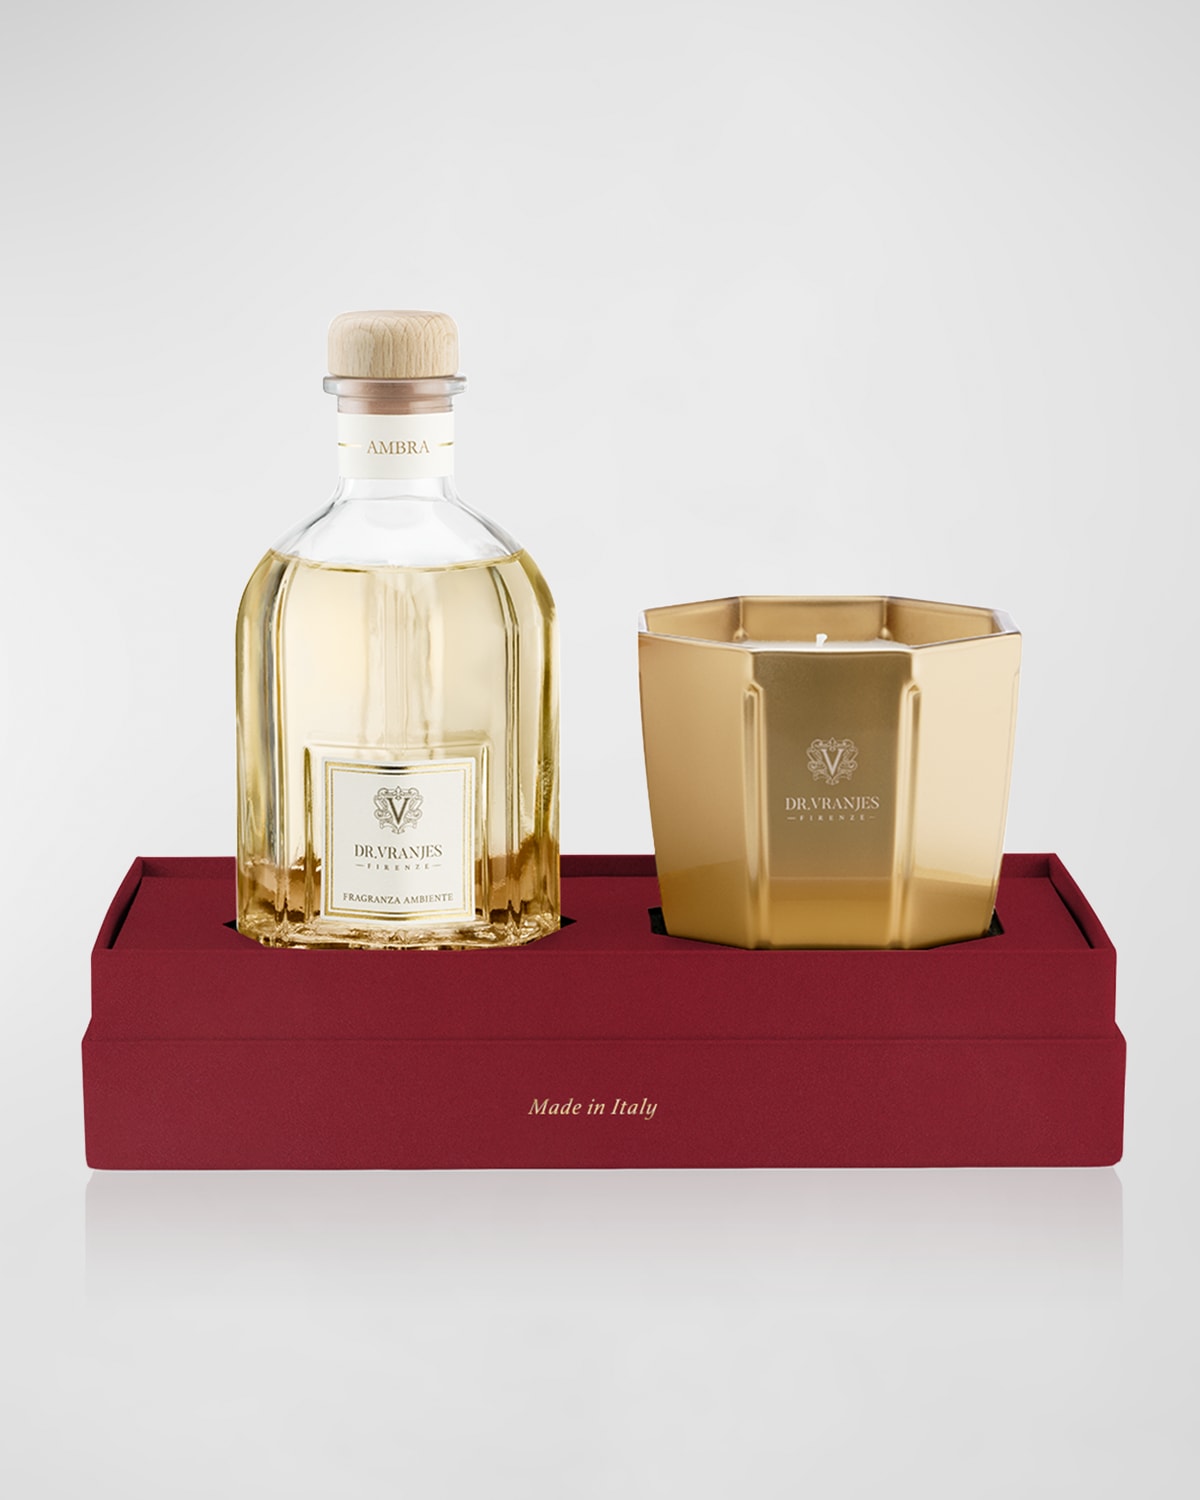 Dr. Vranjes Firenze Ambra 8.4 oz. Diffuser and Candle Holiday Gift Set